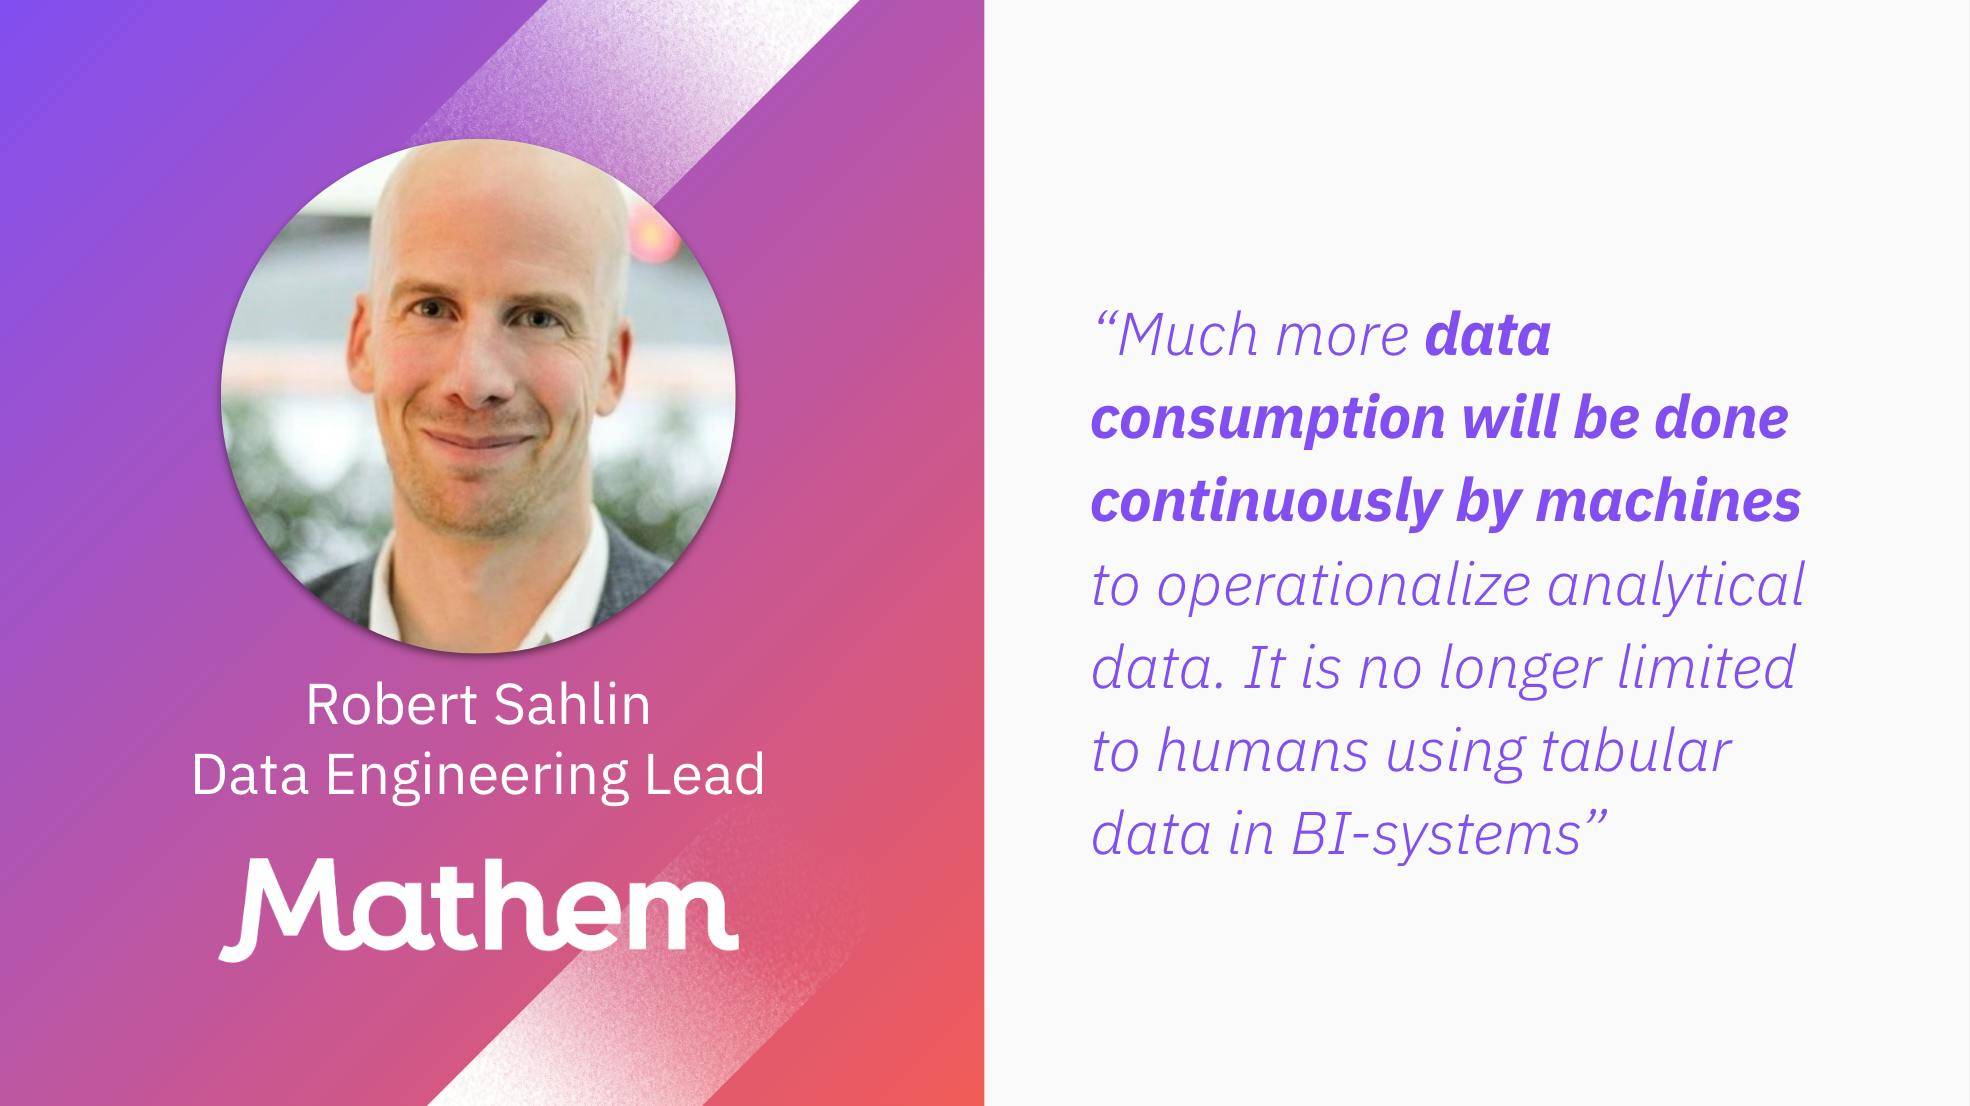 Robert Sahlin, Data Engineering Lead at Mathem: "Much more data consumption will be done continuously by machines to operationalize analytical data. It is no longer limited to humans using tabular data in BI-systems."